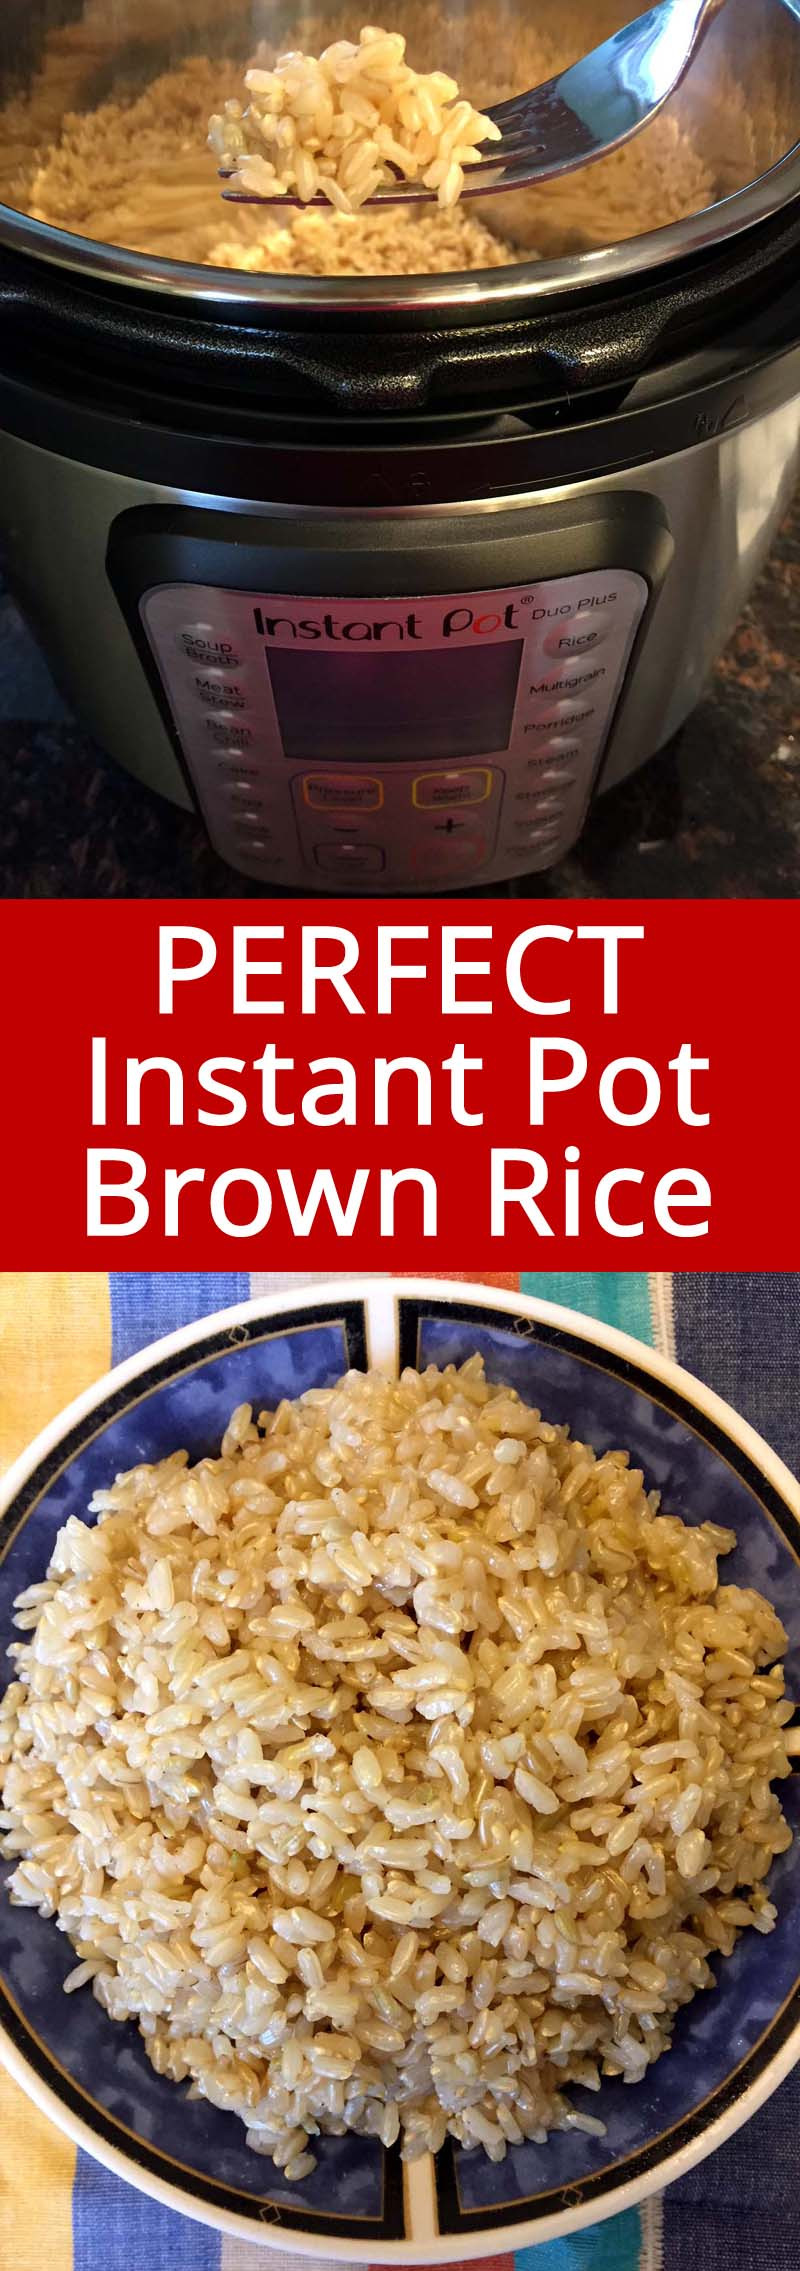 Brown Rice Cooker
 Instant Pot Brown Rice – How To Cook Brown Rice In A